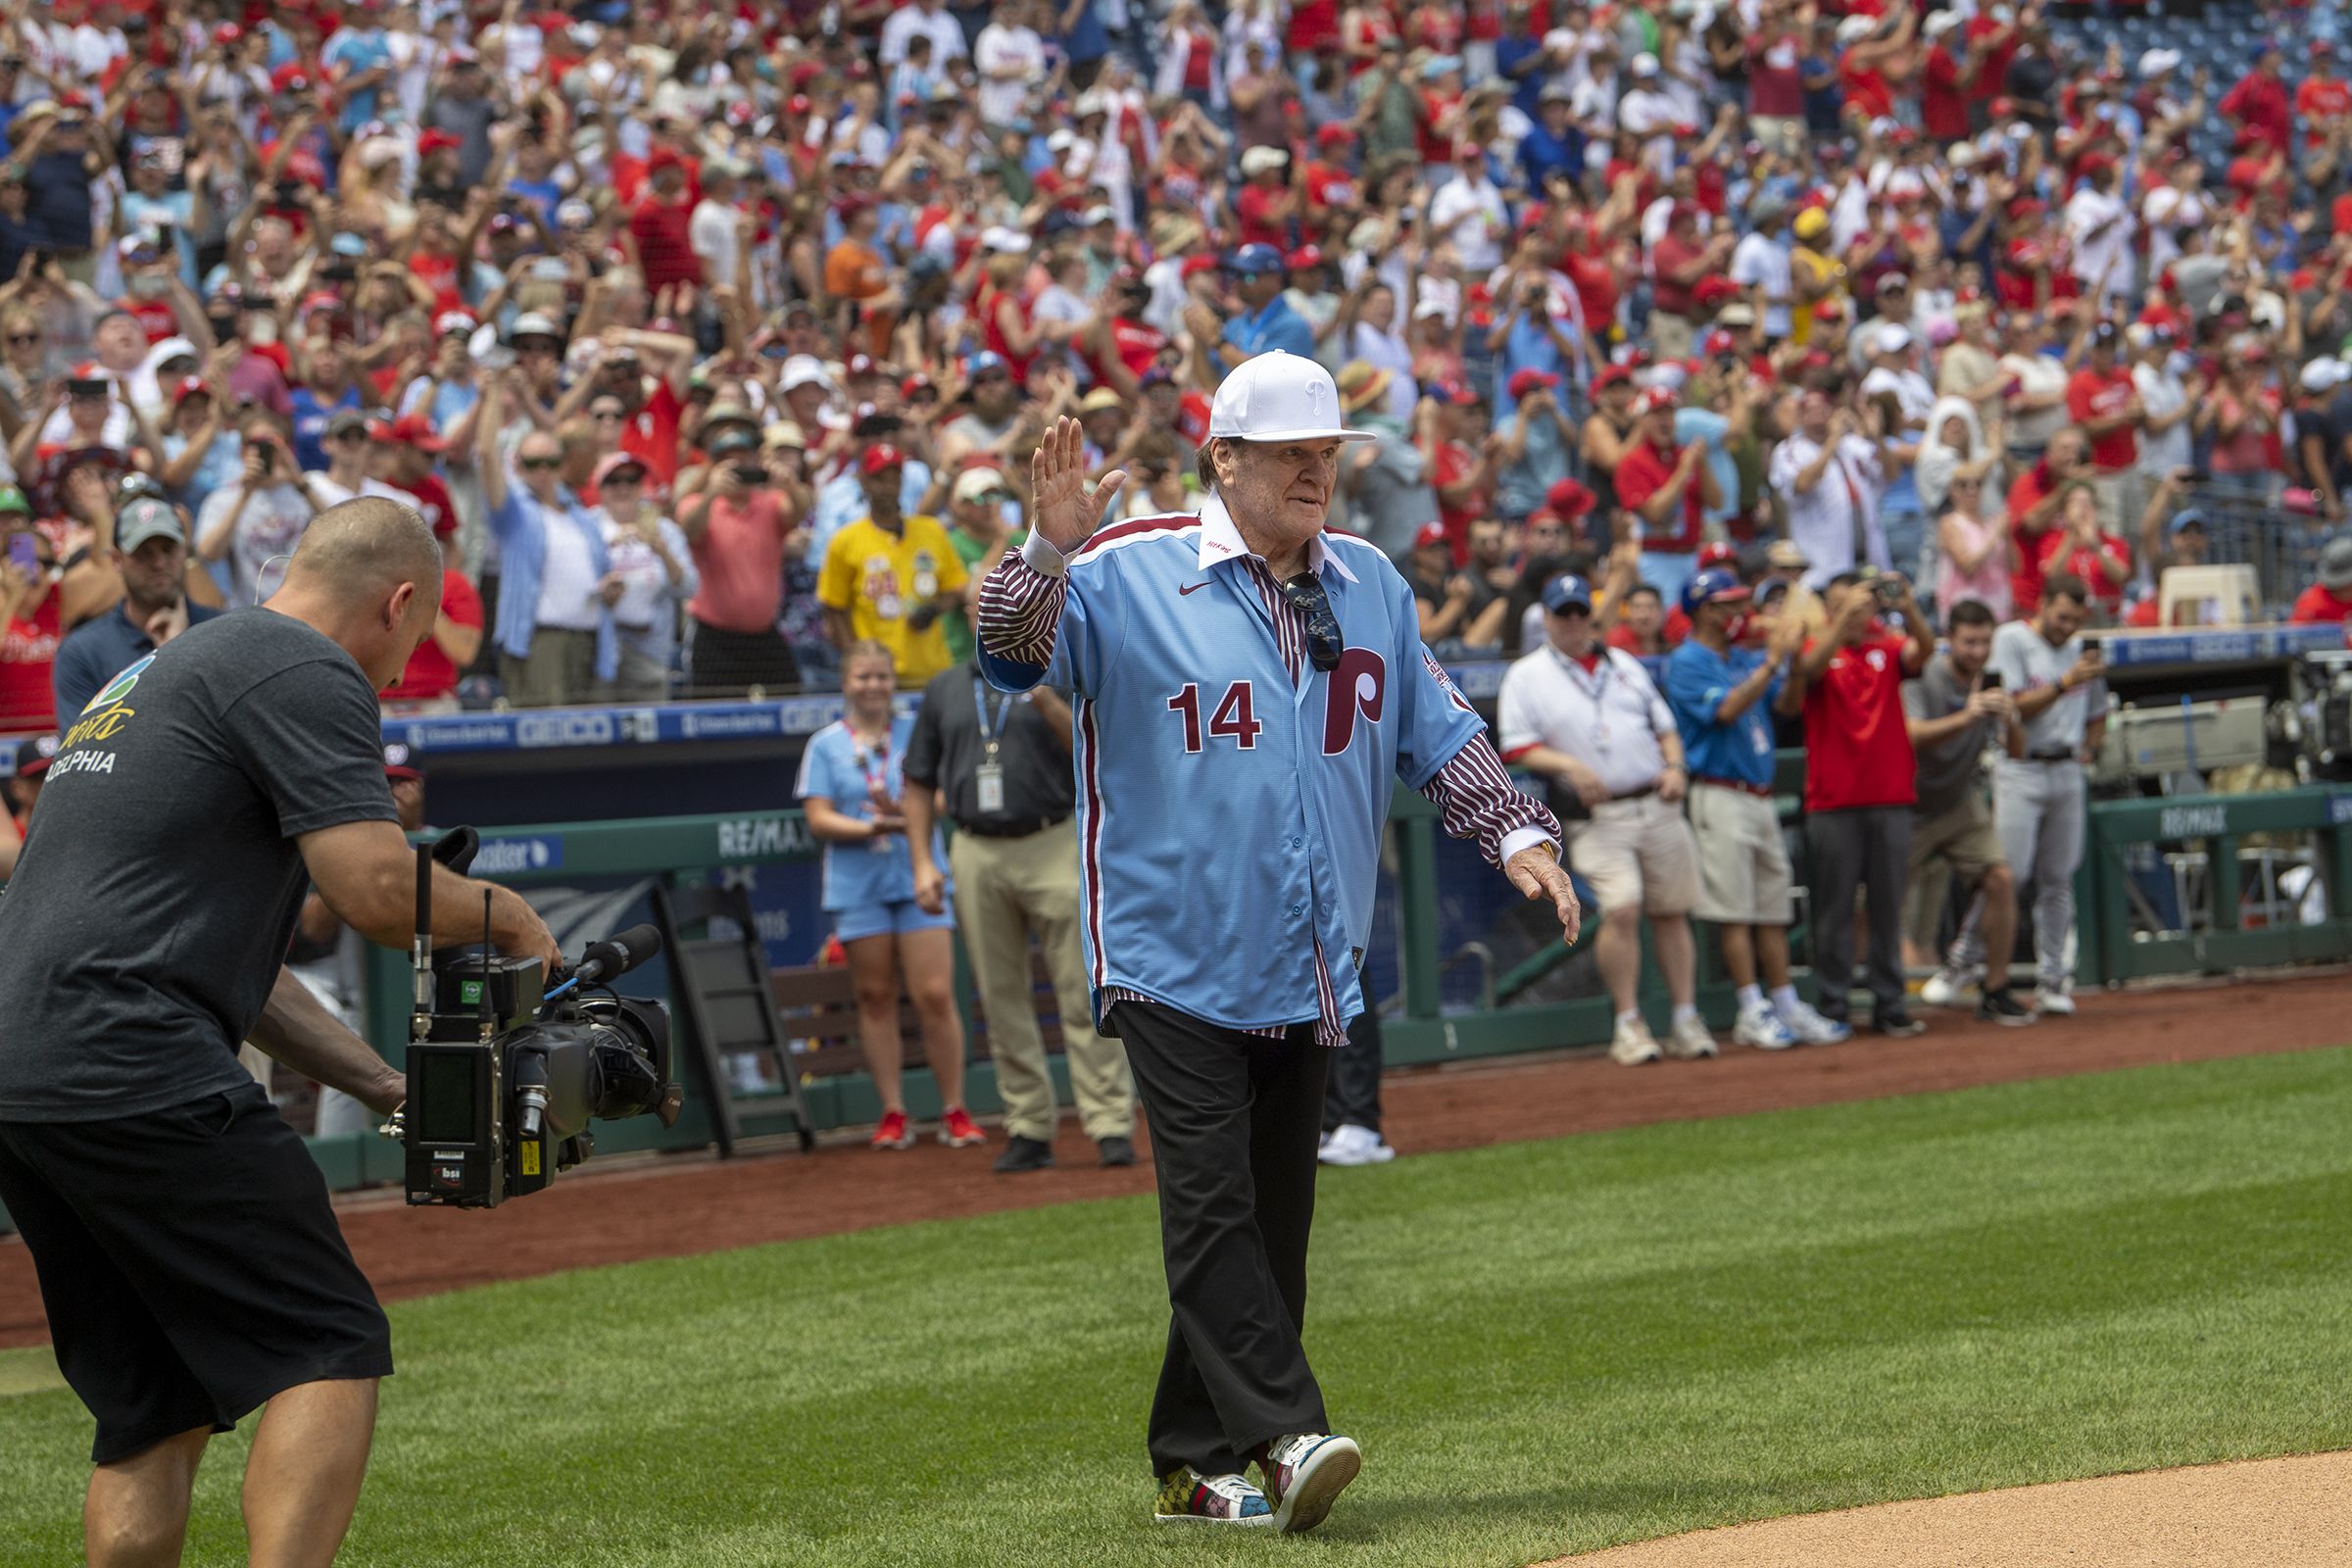 No public apologies for Pete Rose's live TV broadcast remarks